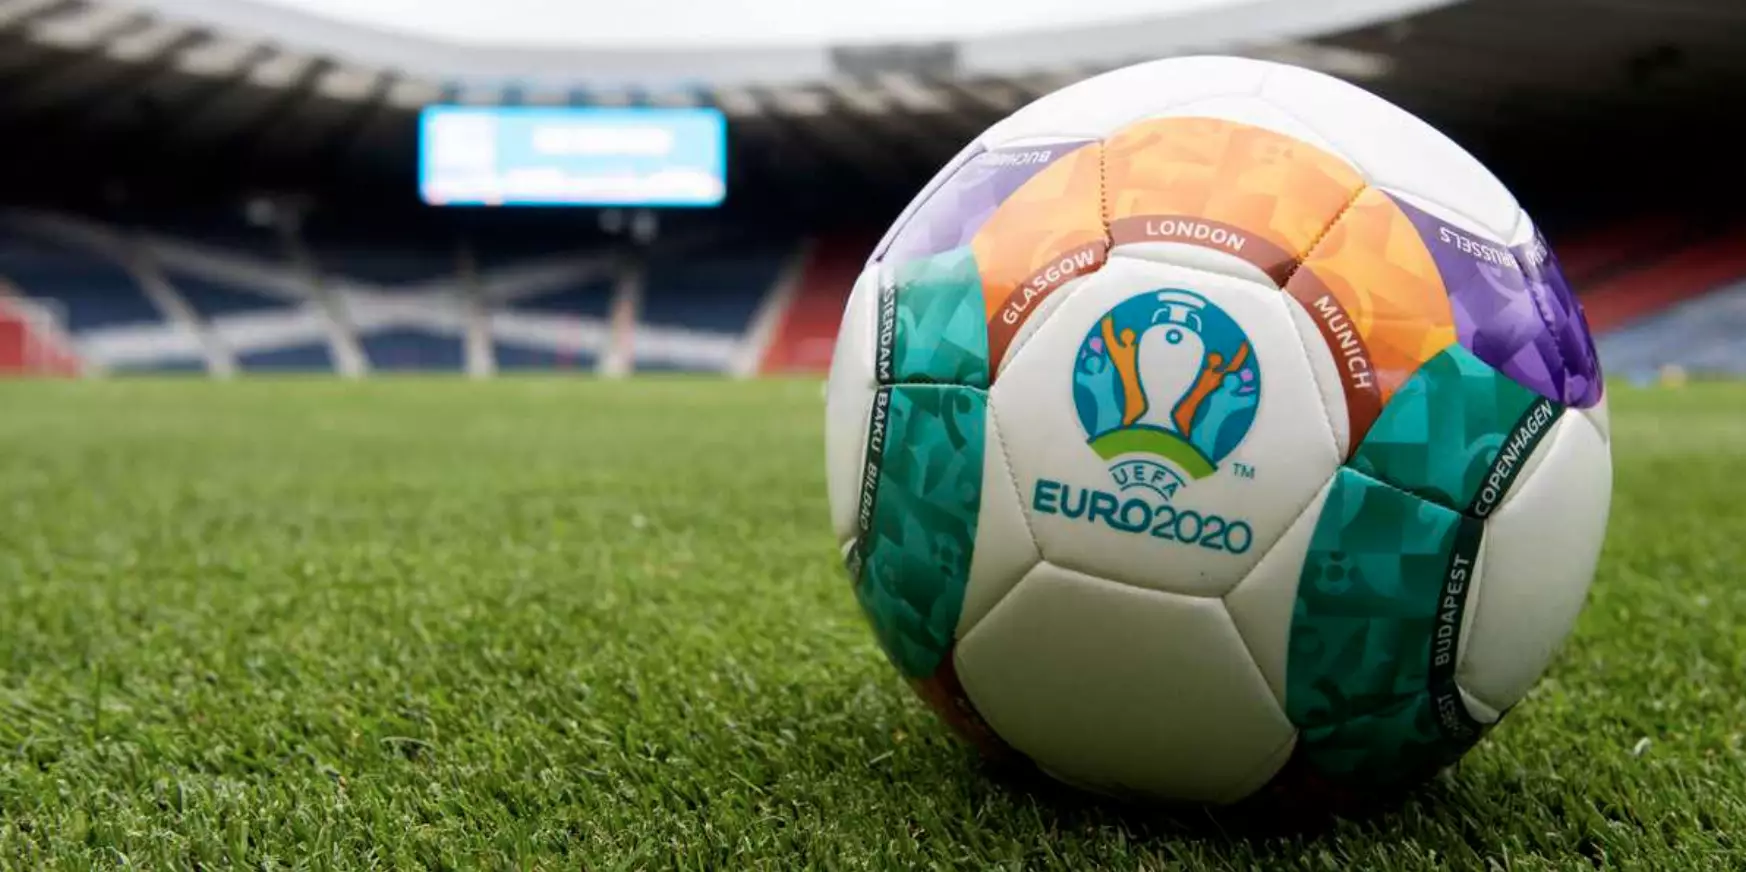 Why hasn't Euro 2020's name been changed to Euro 2021?